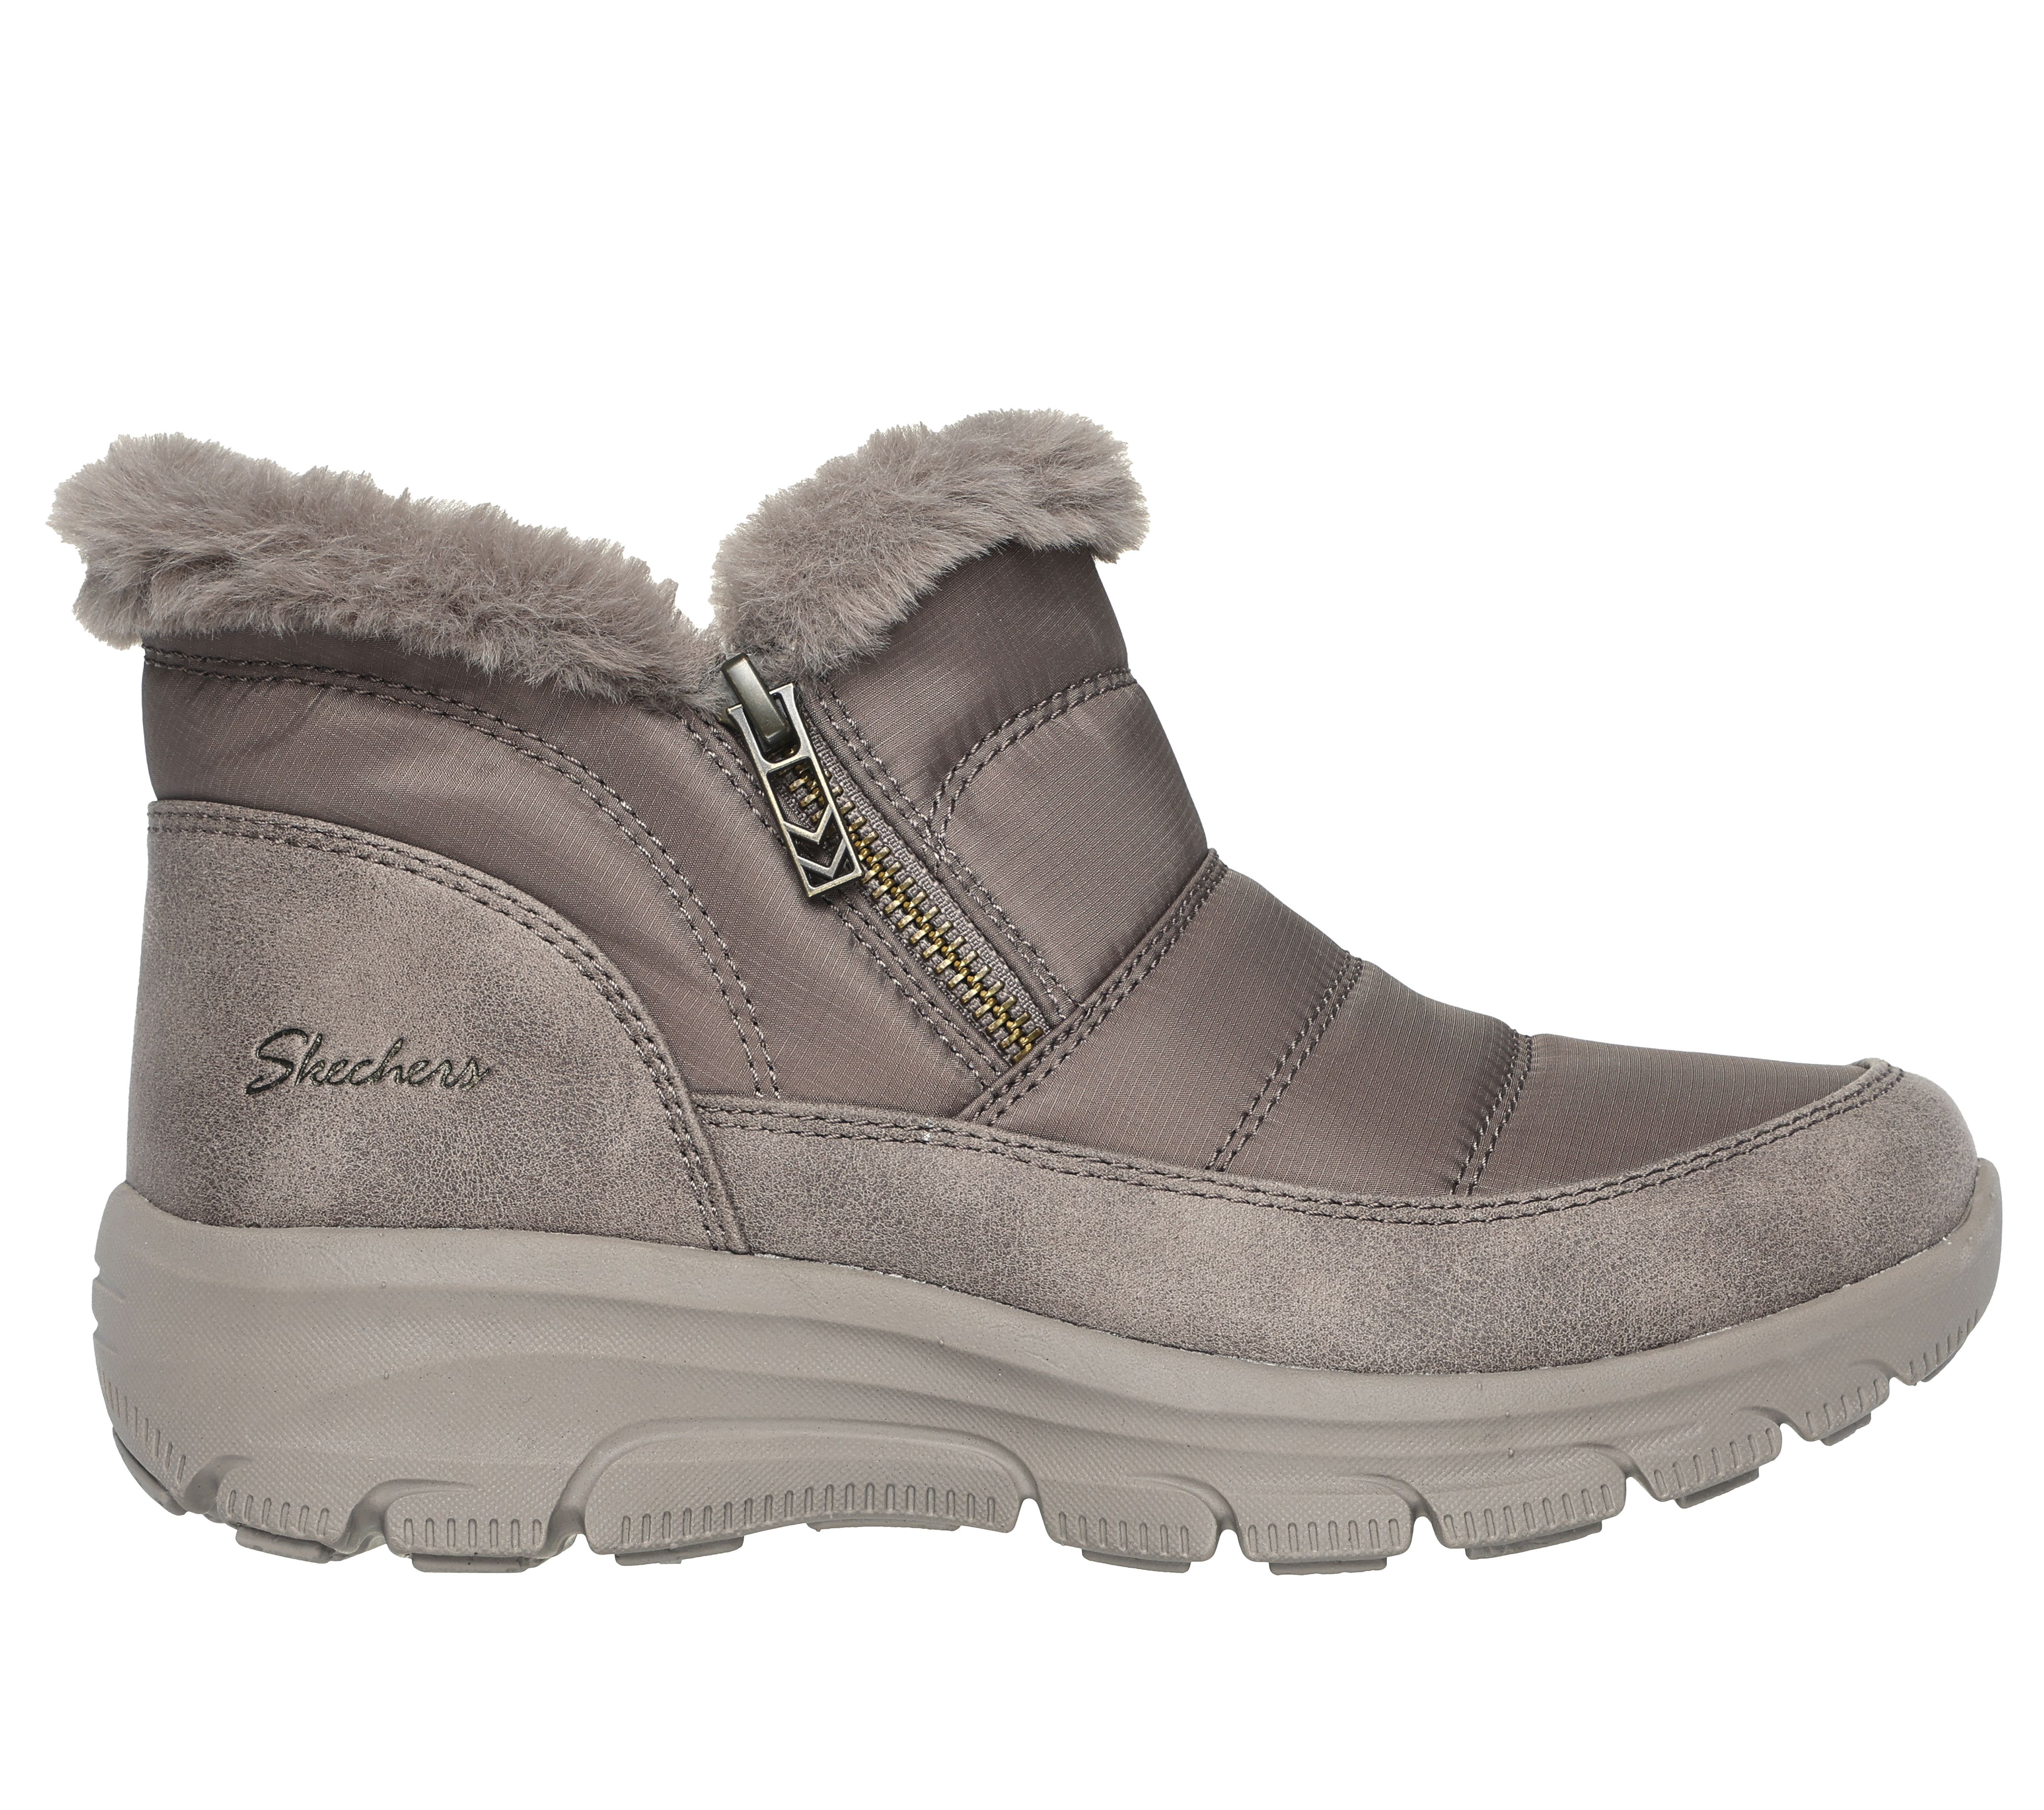 Shop the Relaxed Fit: Easy Going - Frosty Charm | SKECHERS CA